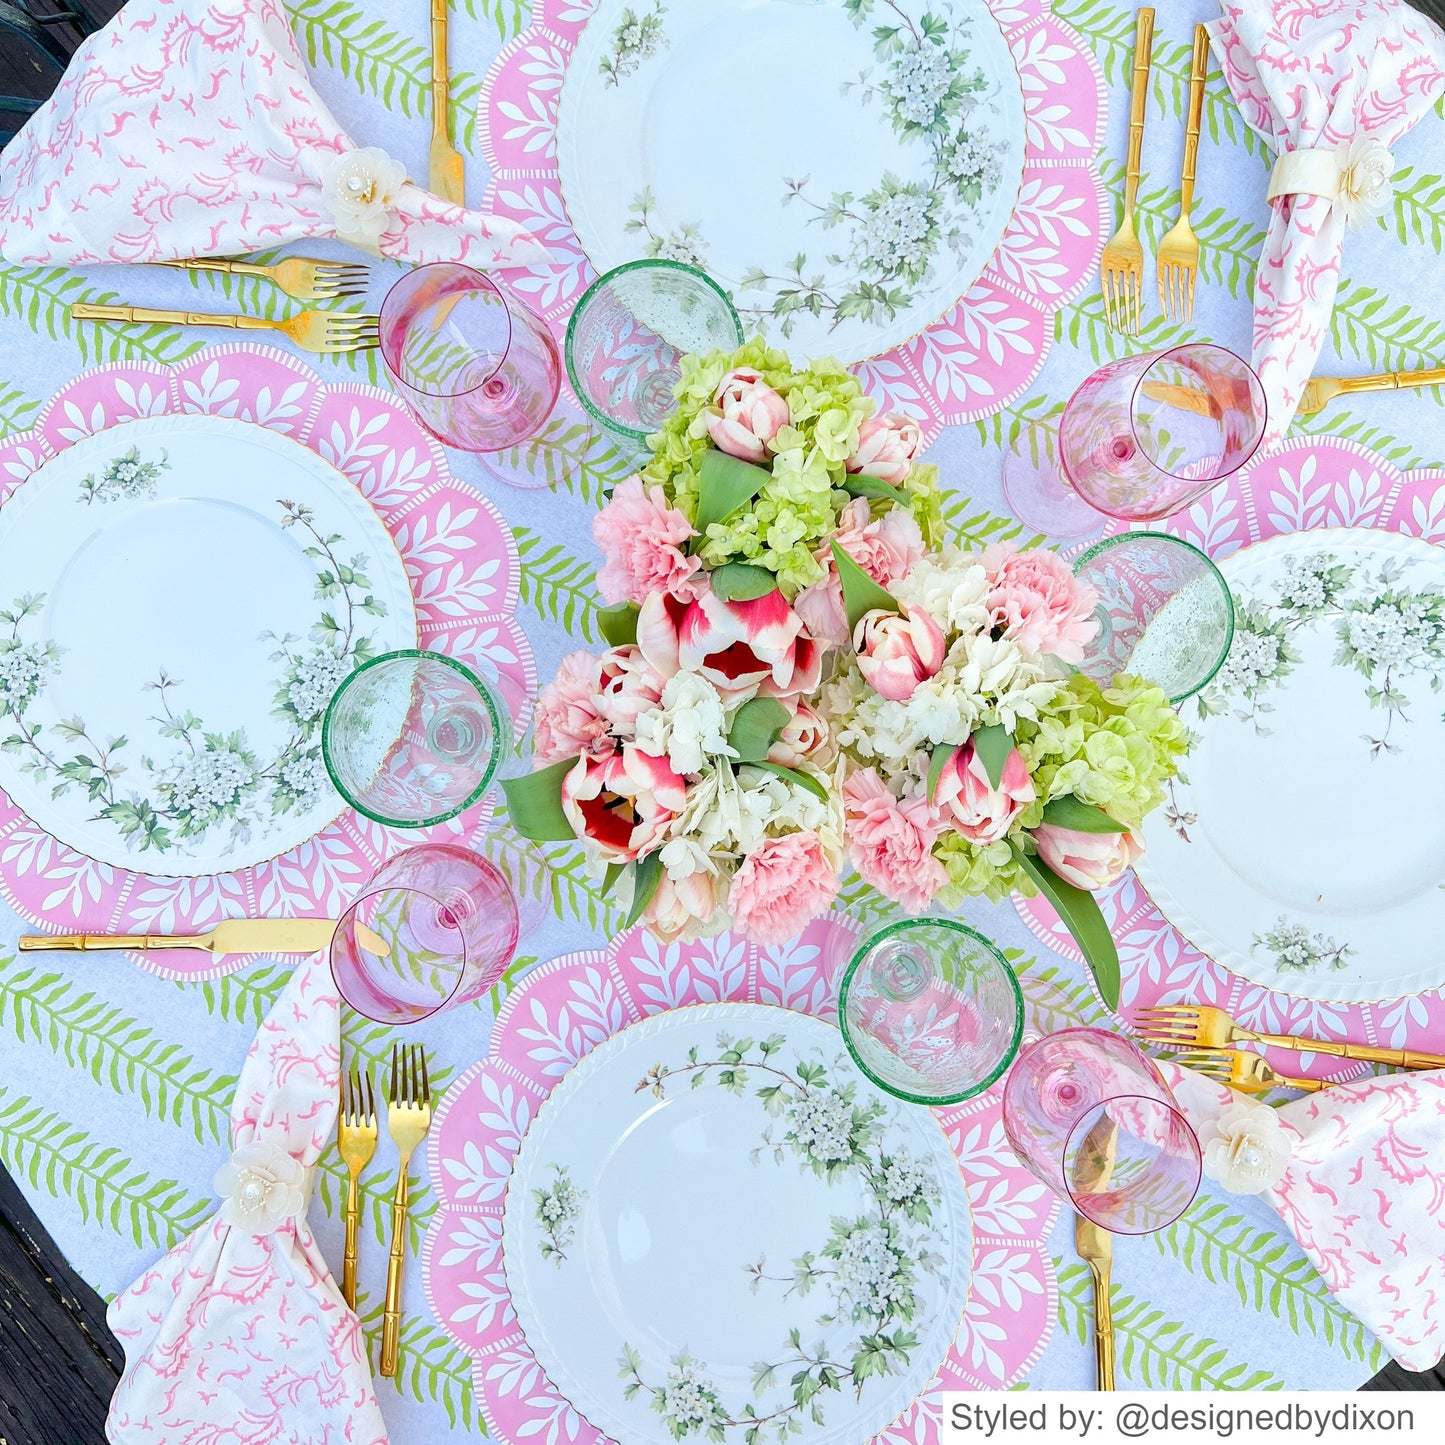 Pink and white scalloped round paper placemats on a green and white patterned tablecloth with flowers